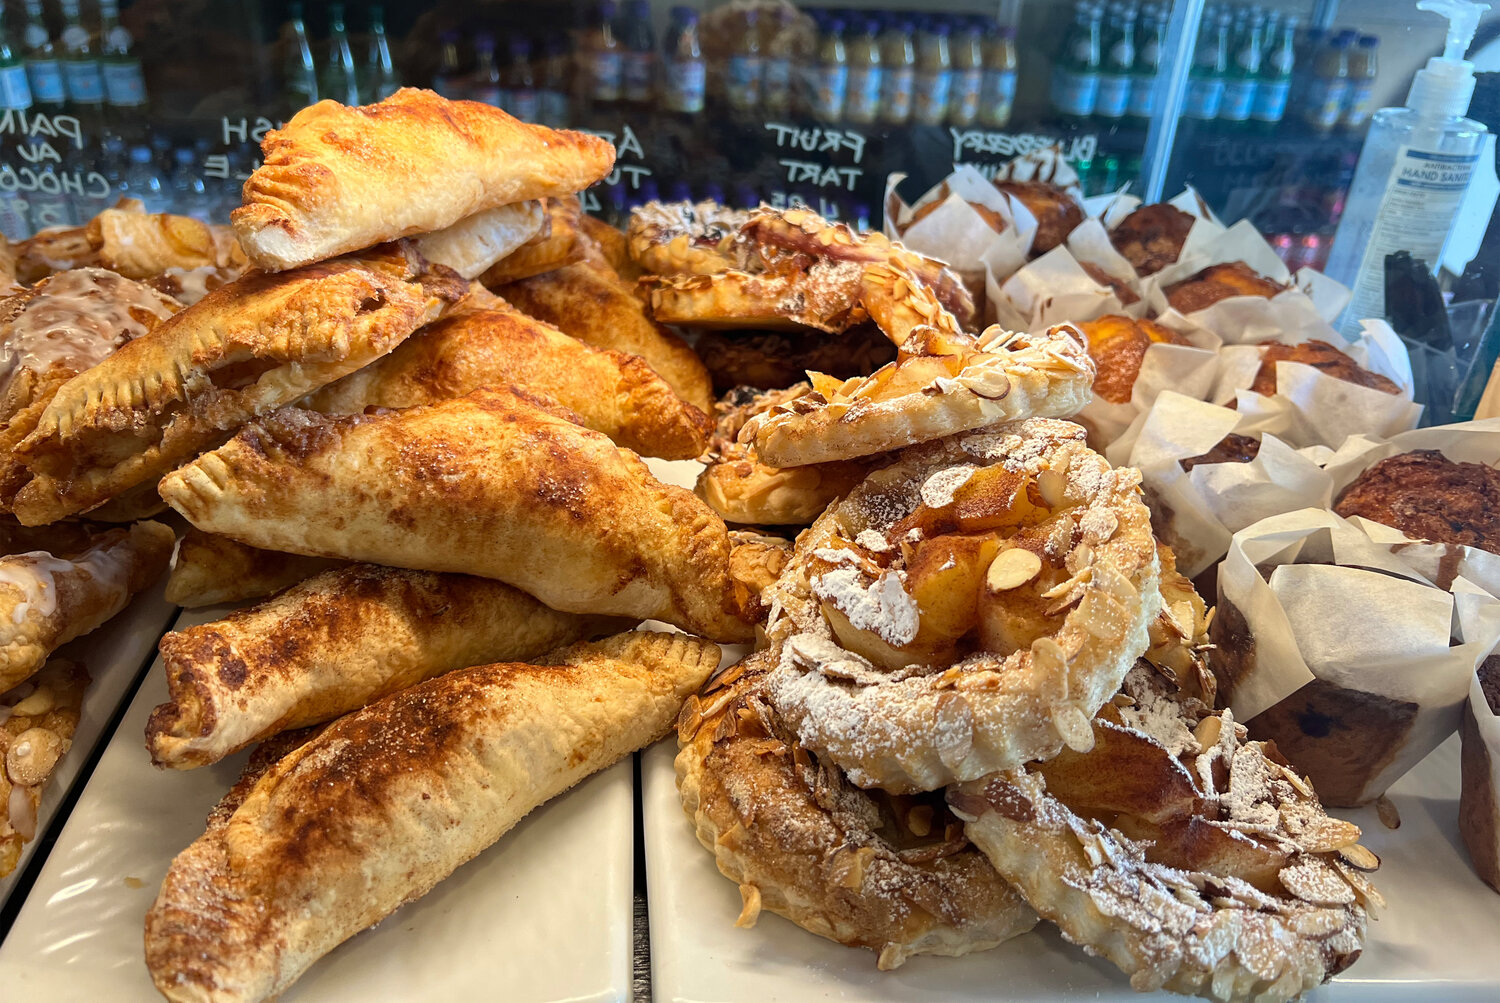 A full pastry case at Picnic Cafe